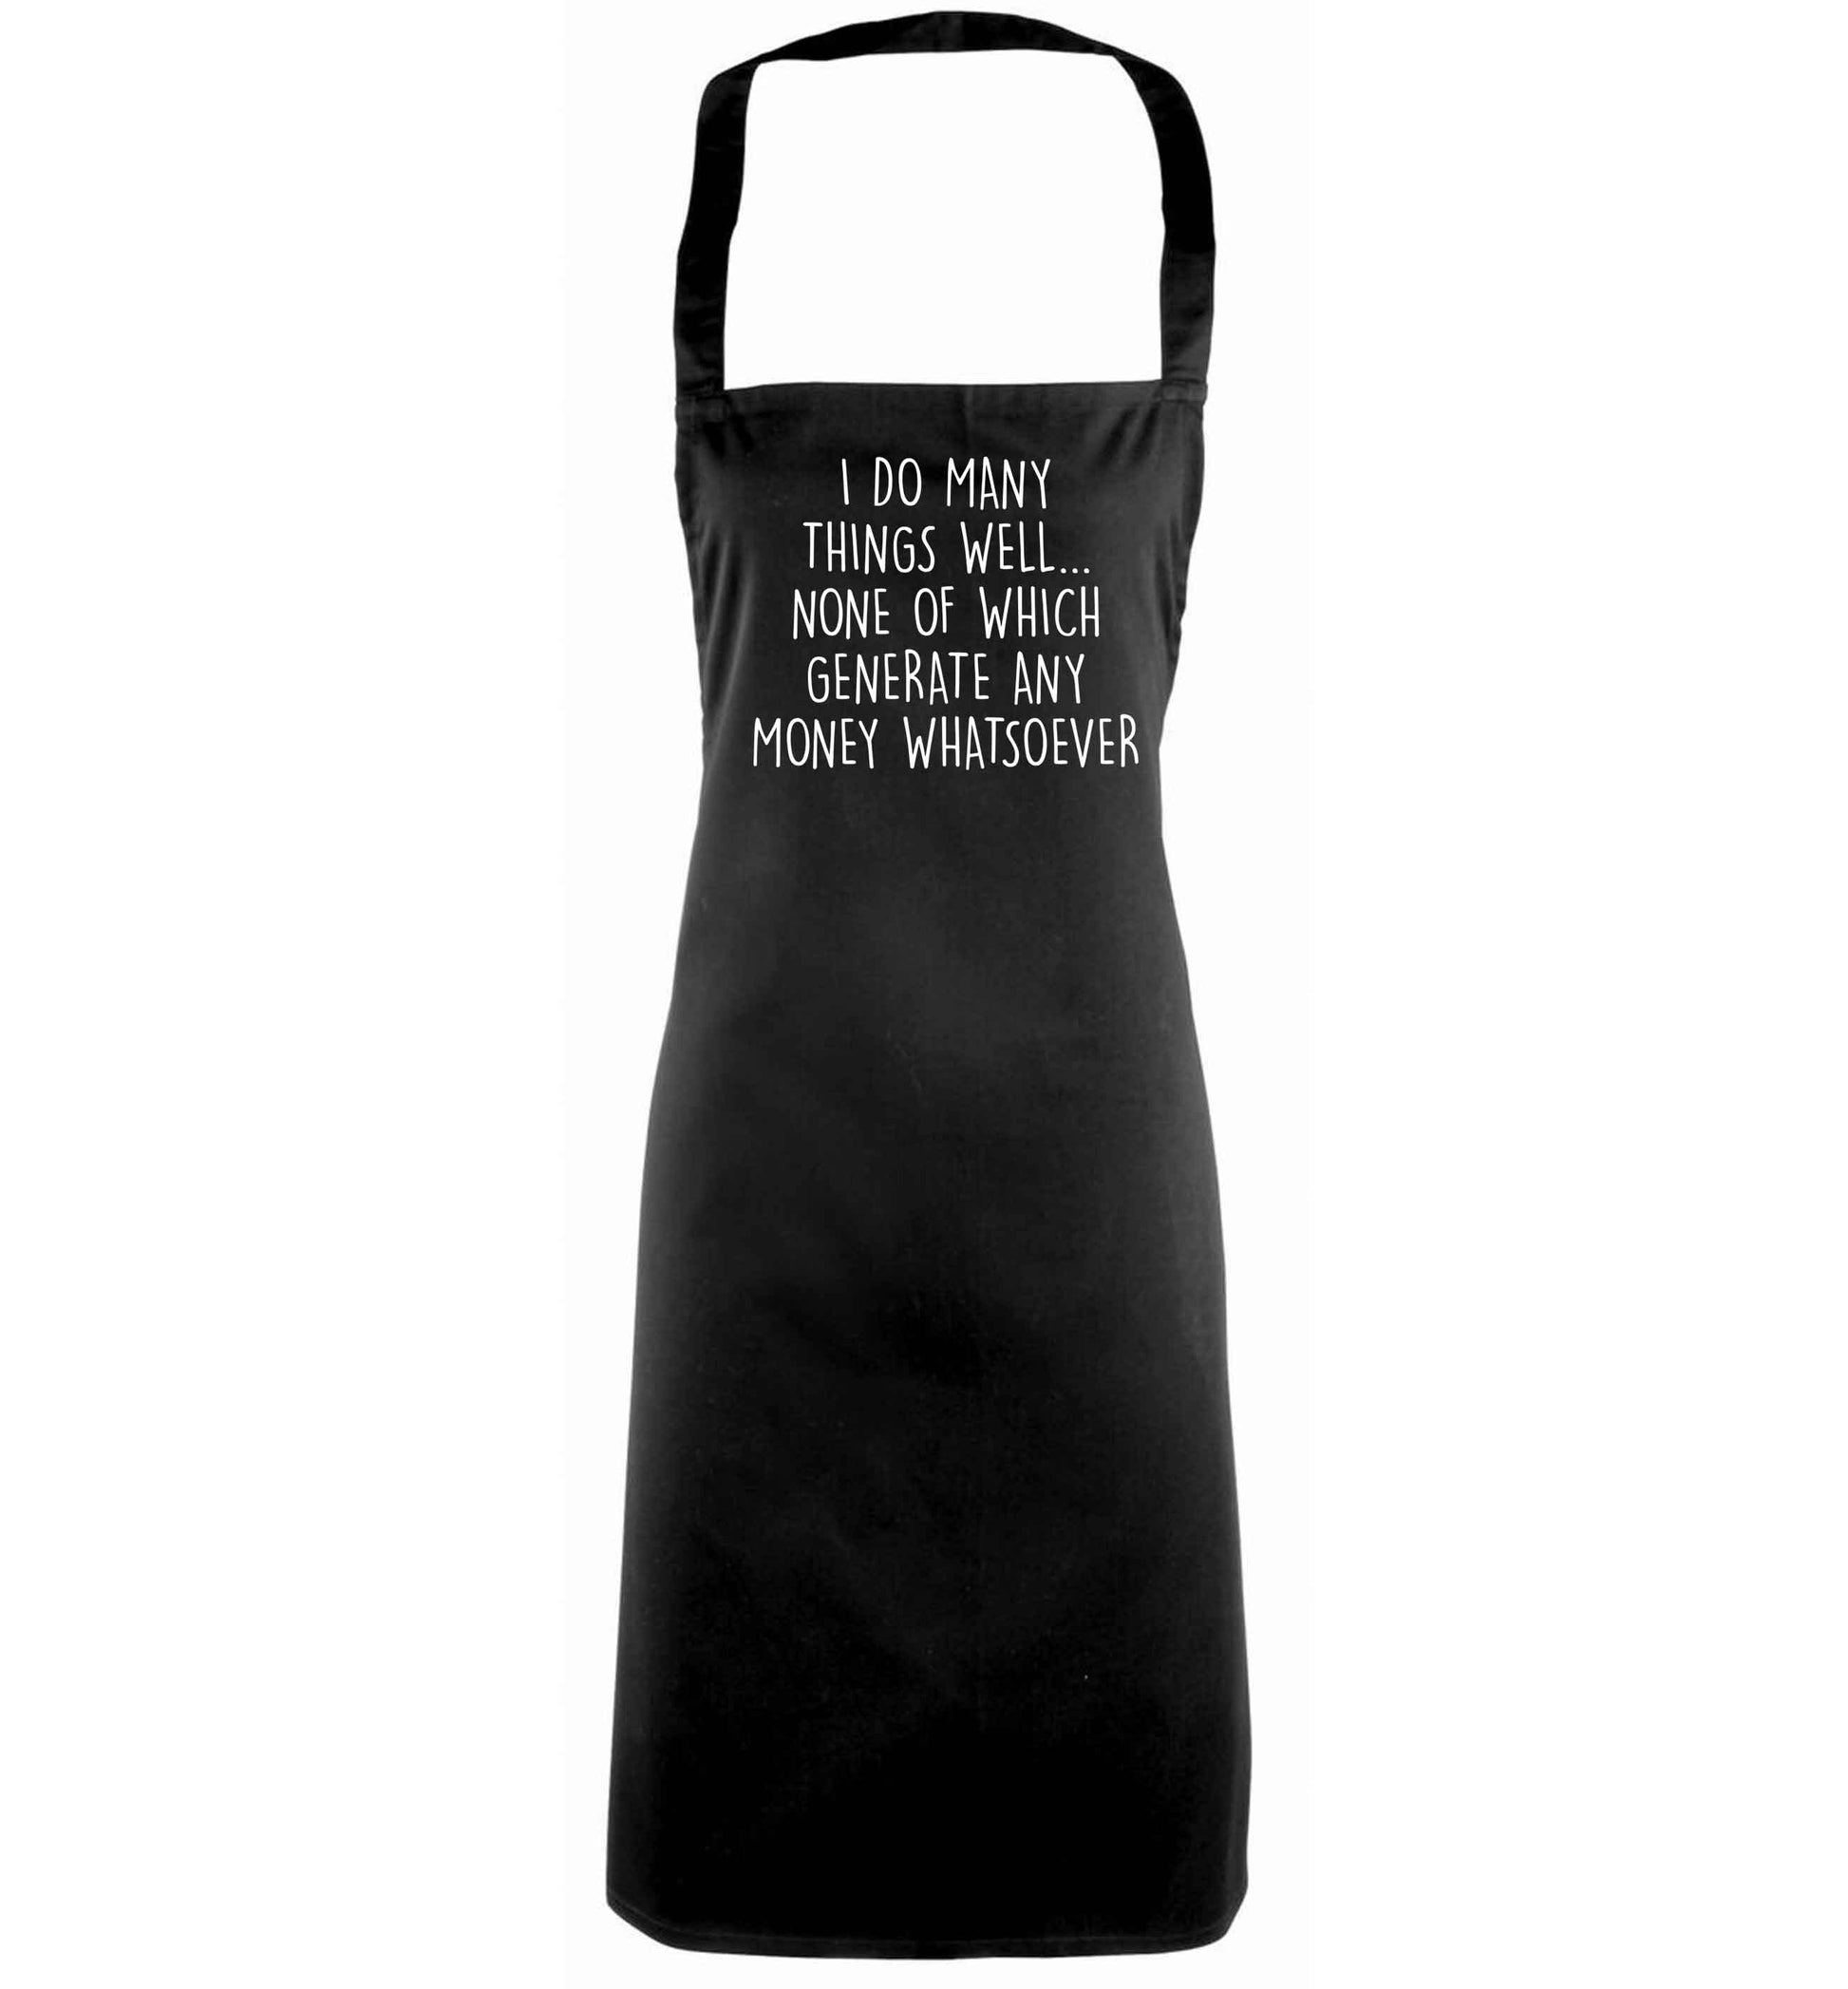 I do many things well none of which generate income black apron